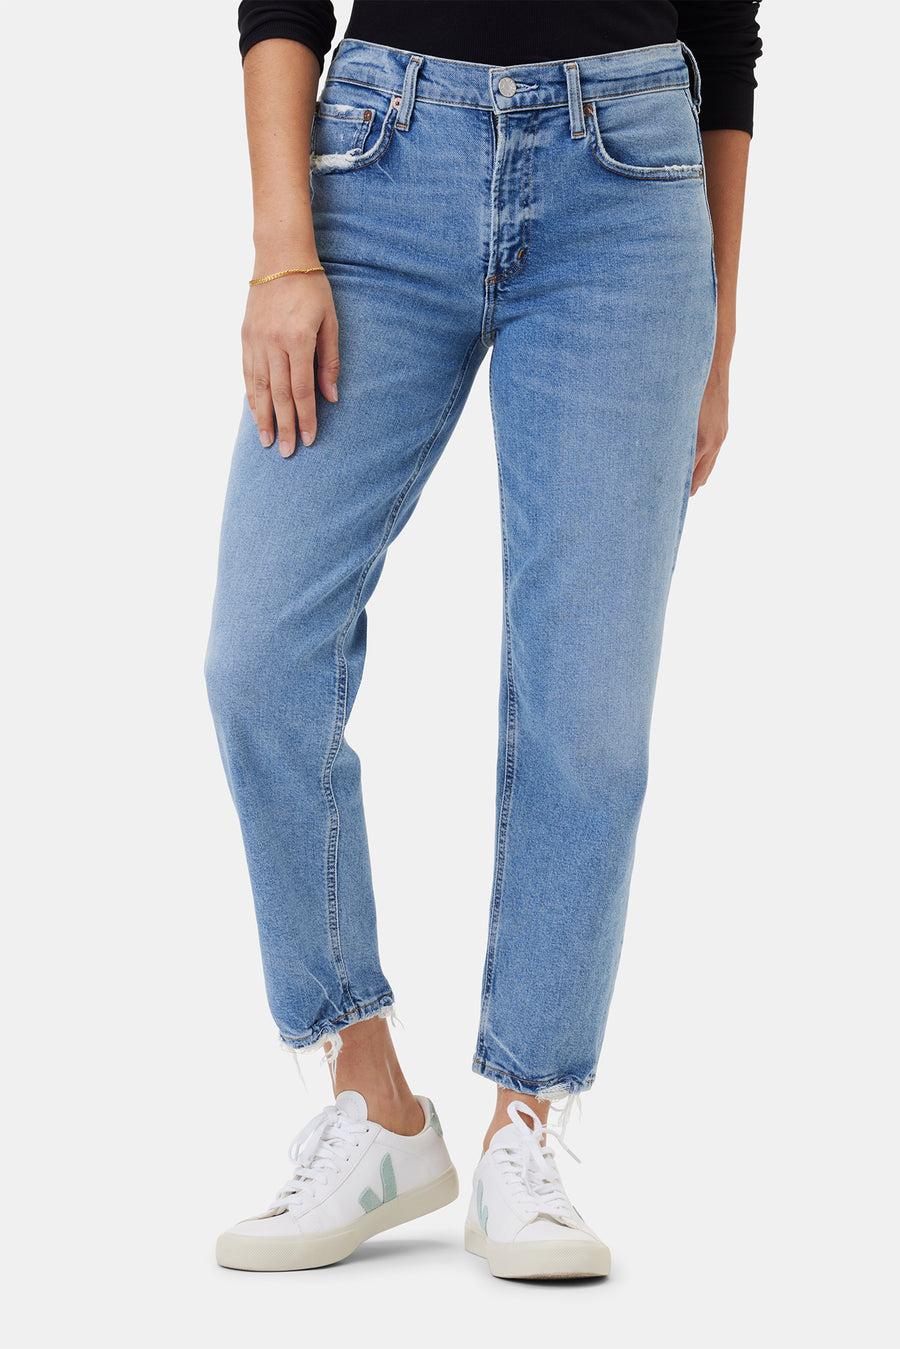 AGOLDE Kye Mid Rise Straight Crop Jean - Forseen